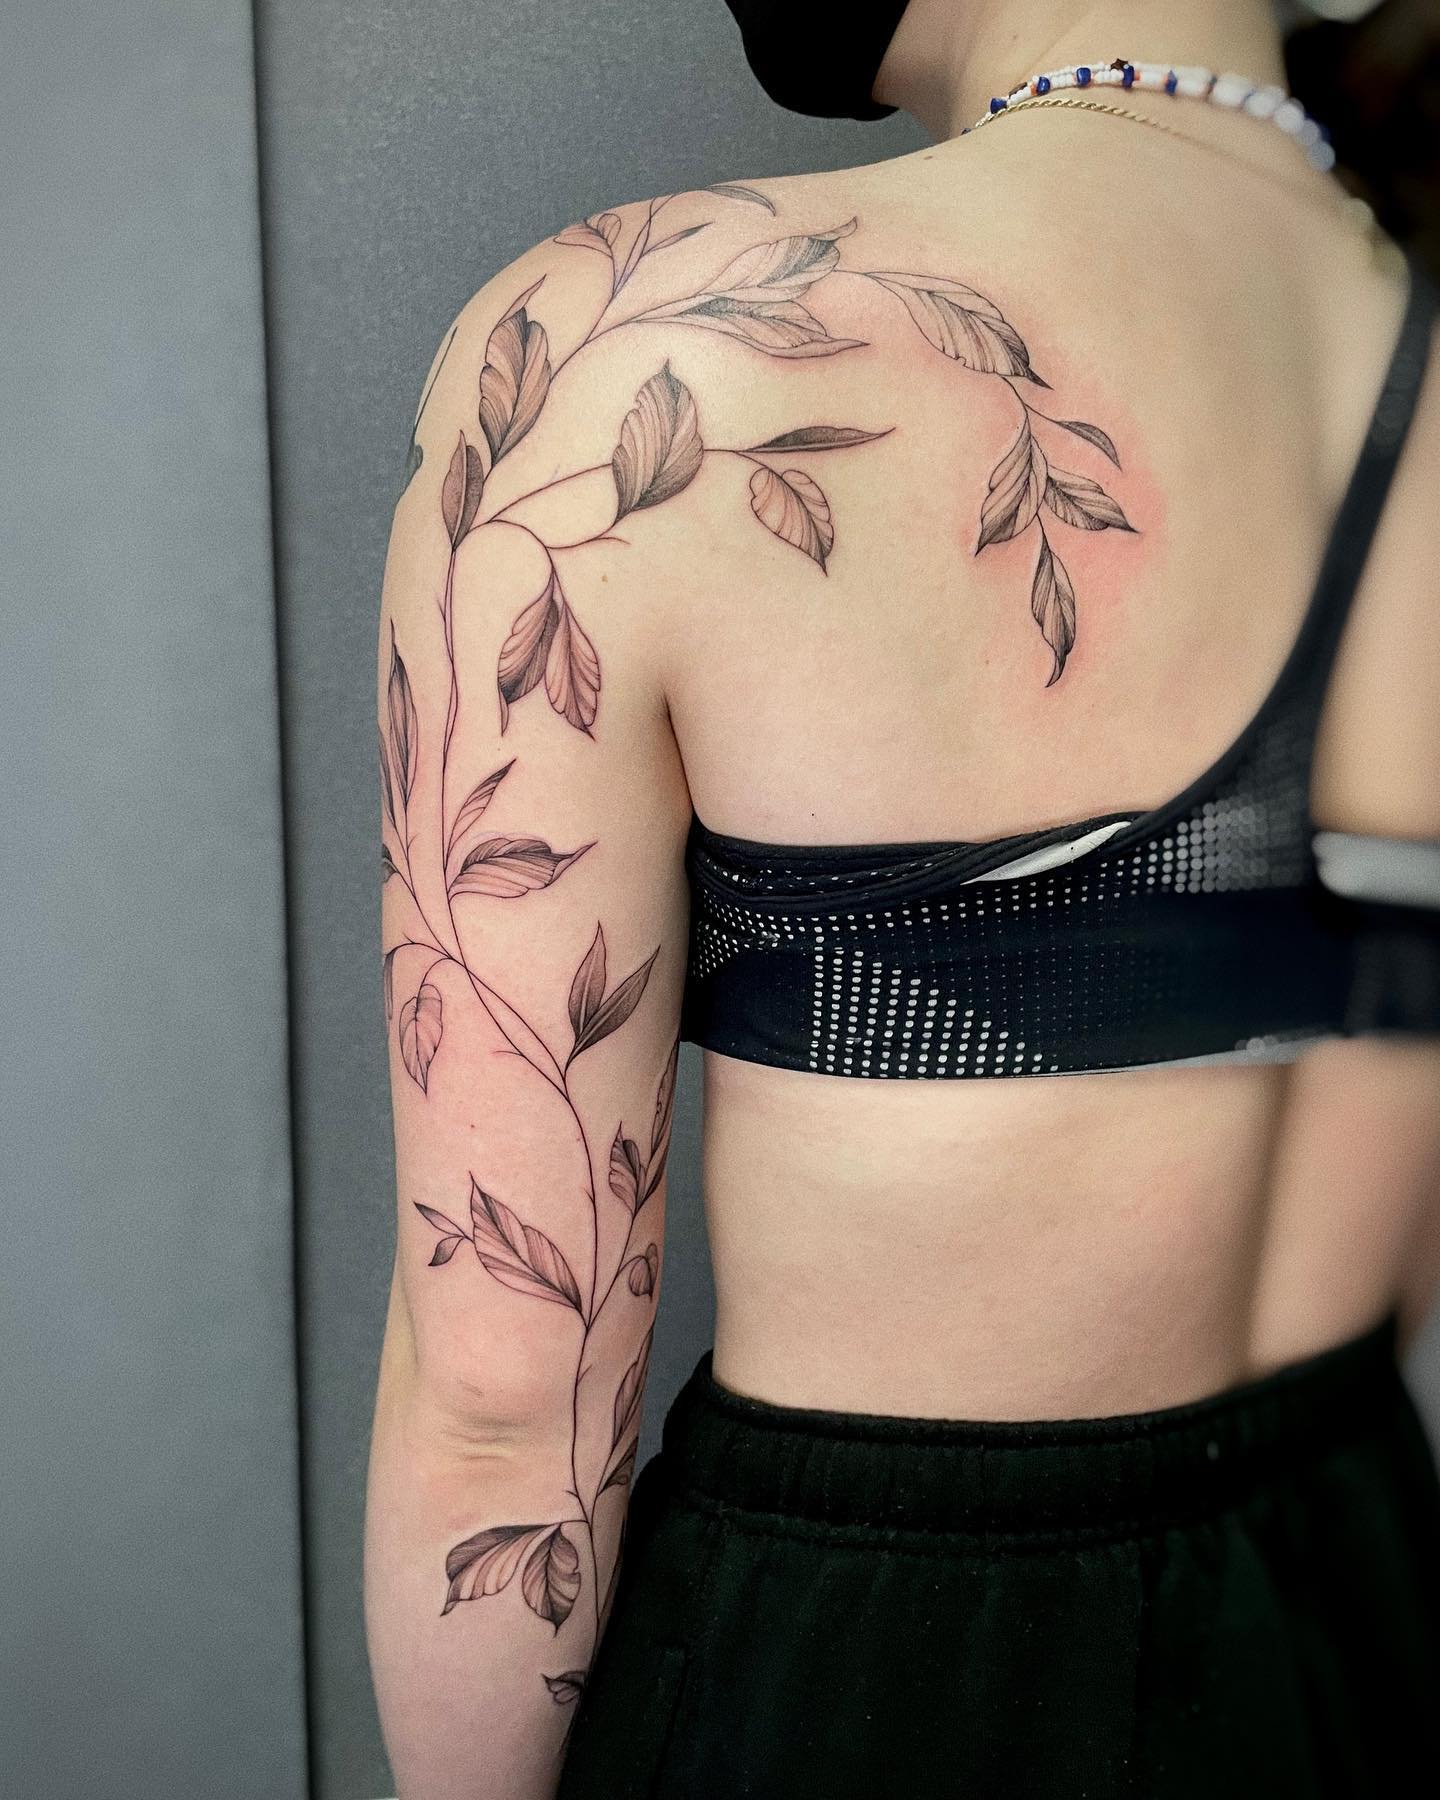 30+ Leaf Tattoos That Look Great on Any Piece of Skin - 100 Tattoos